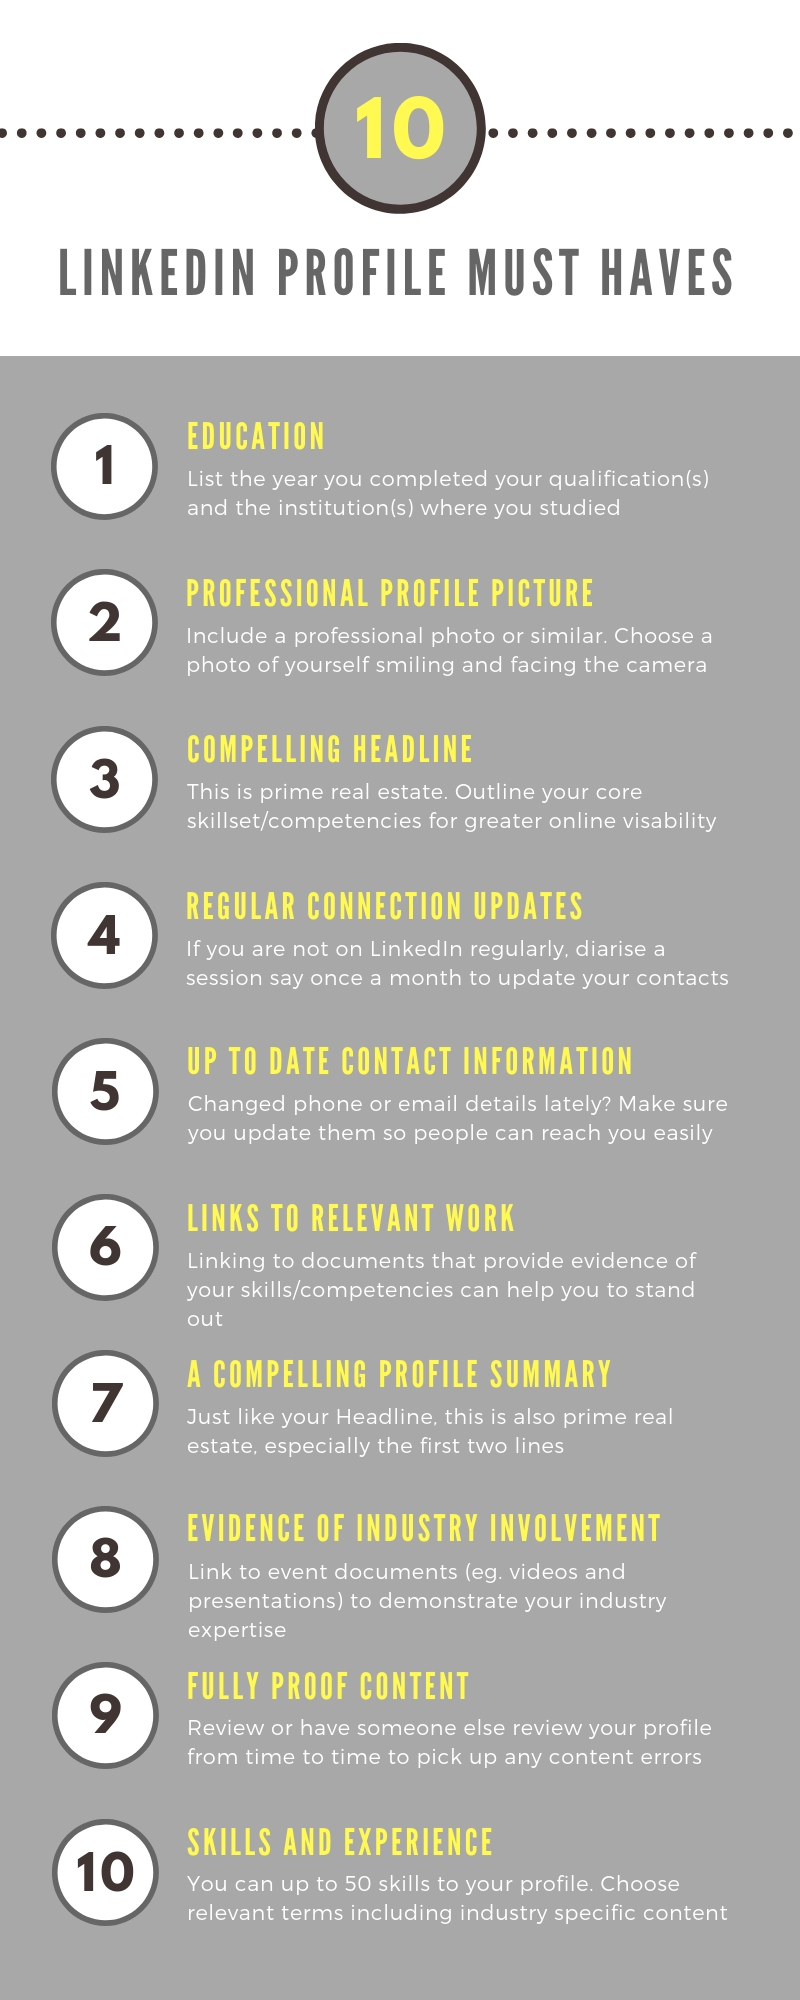 Top 10 LinkedIn Tips for Candidates 